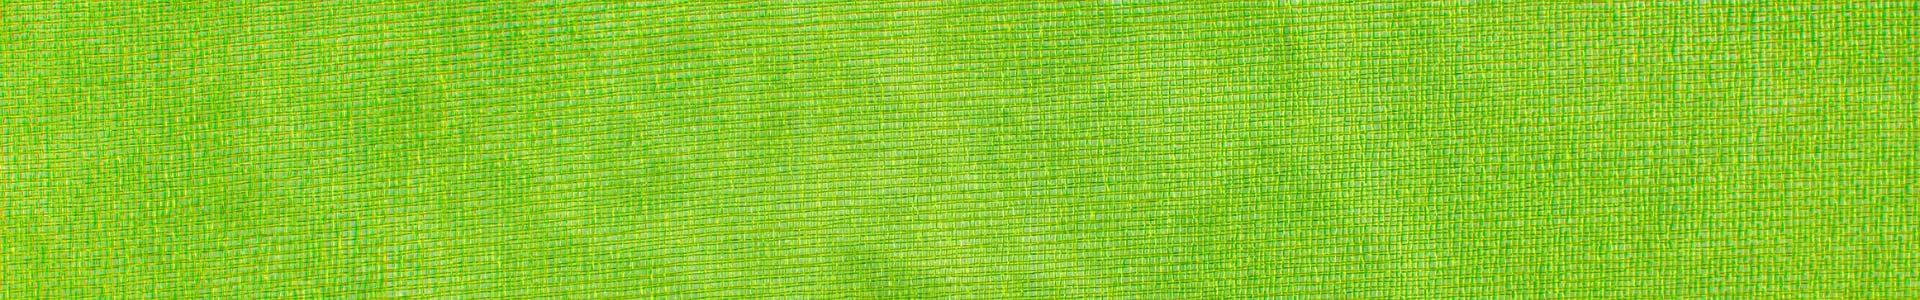 Lime colored textured background